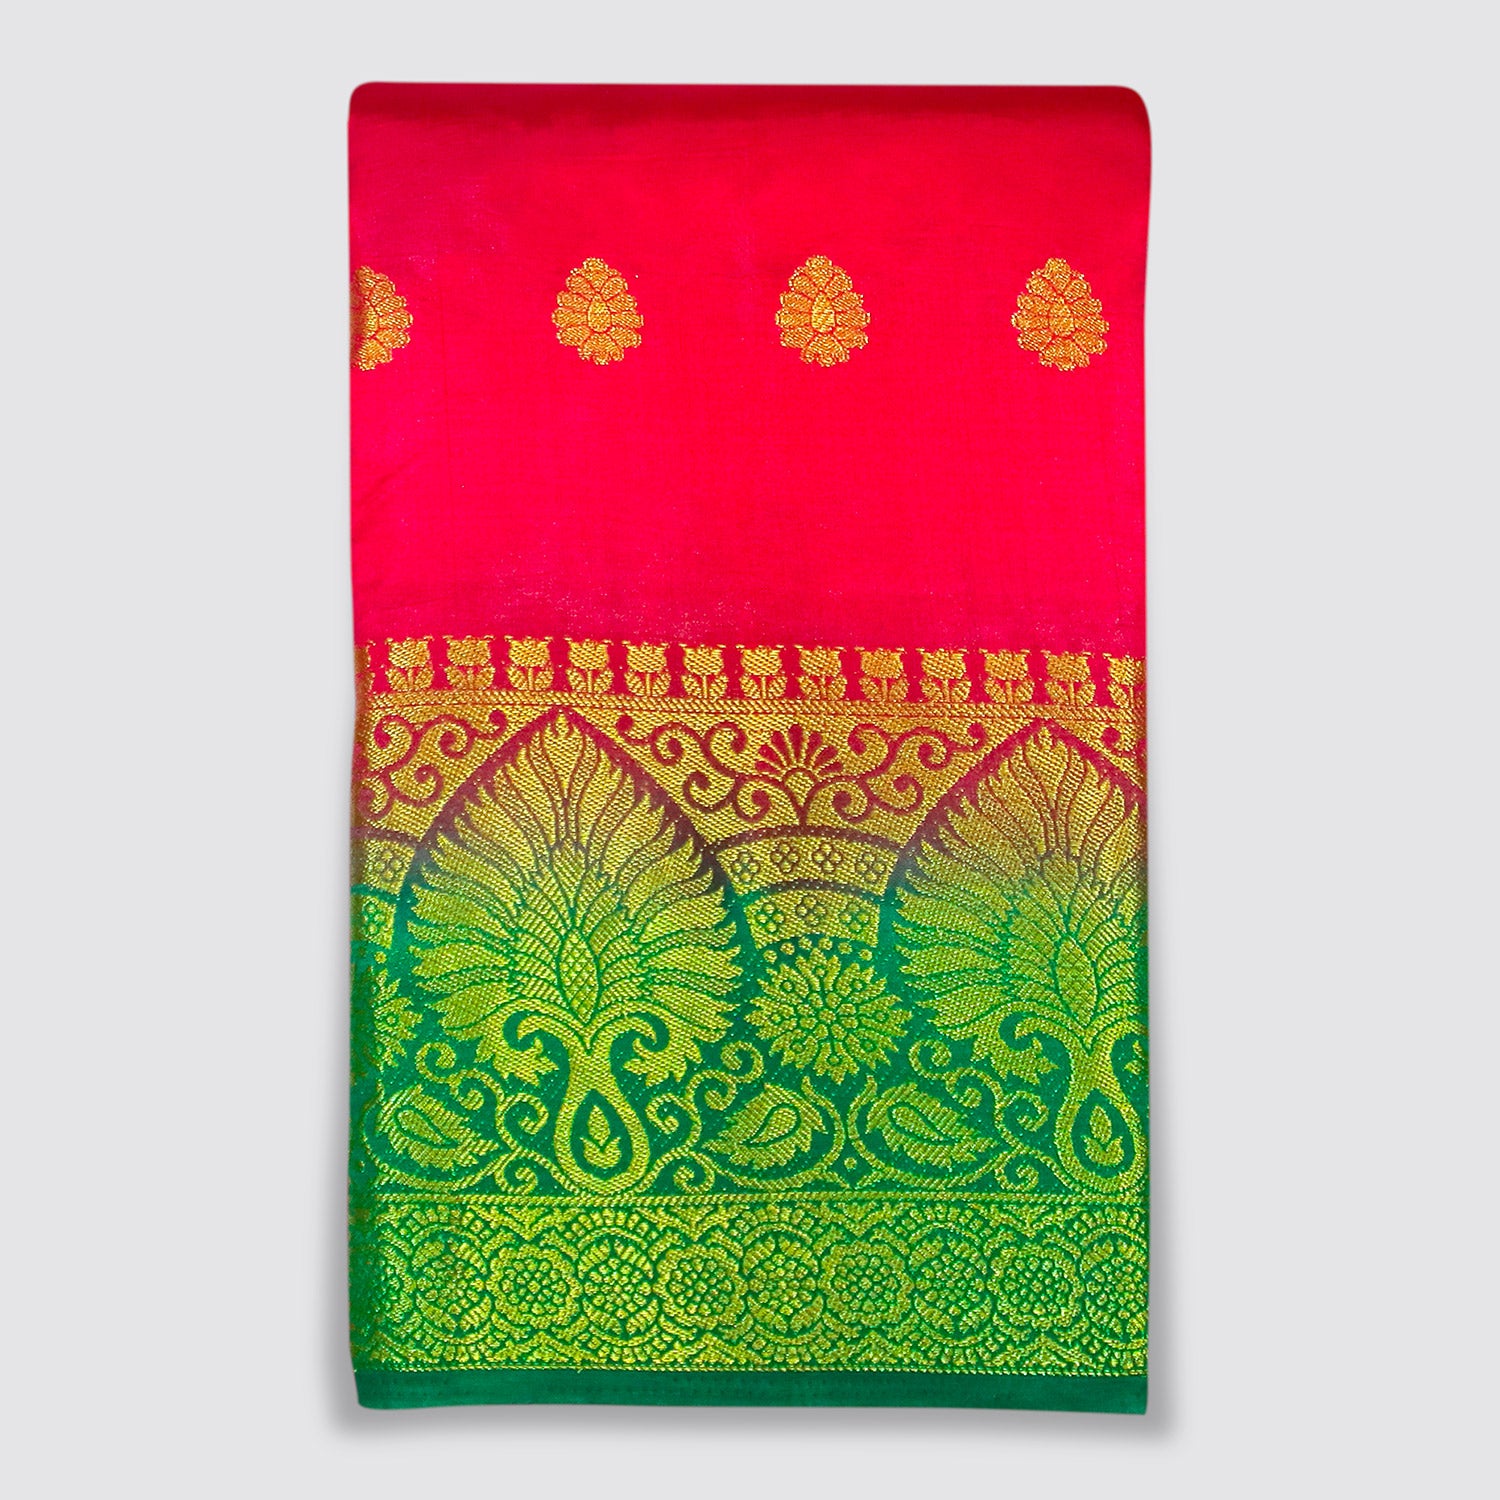 Pink Silk Saree, Contrast Border Saree, Traditional Indian Saree, Wedding Silk Saree, Festive Wear, Elegant Ethnic Attire, Luxurious Silk Fabric, Handcrafted Detailing, Timeless Charm, Bloomaya Exclusive Saree, Special Occasion Outfit, Women's Ethnic Fashion, Classic Indian Attire, Comfortable Saree Drape, High-Quality Craftsmanship.